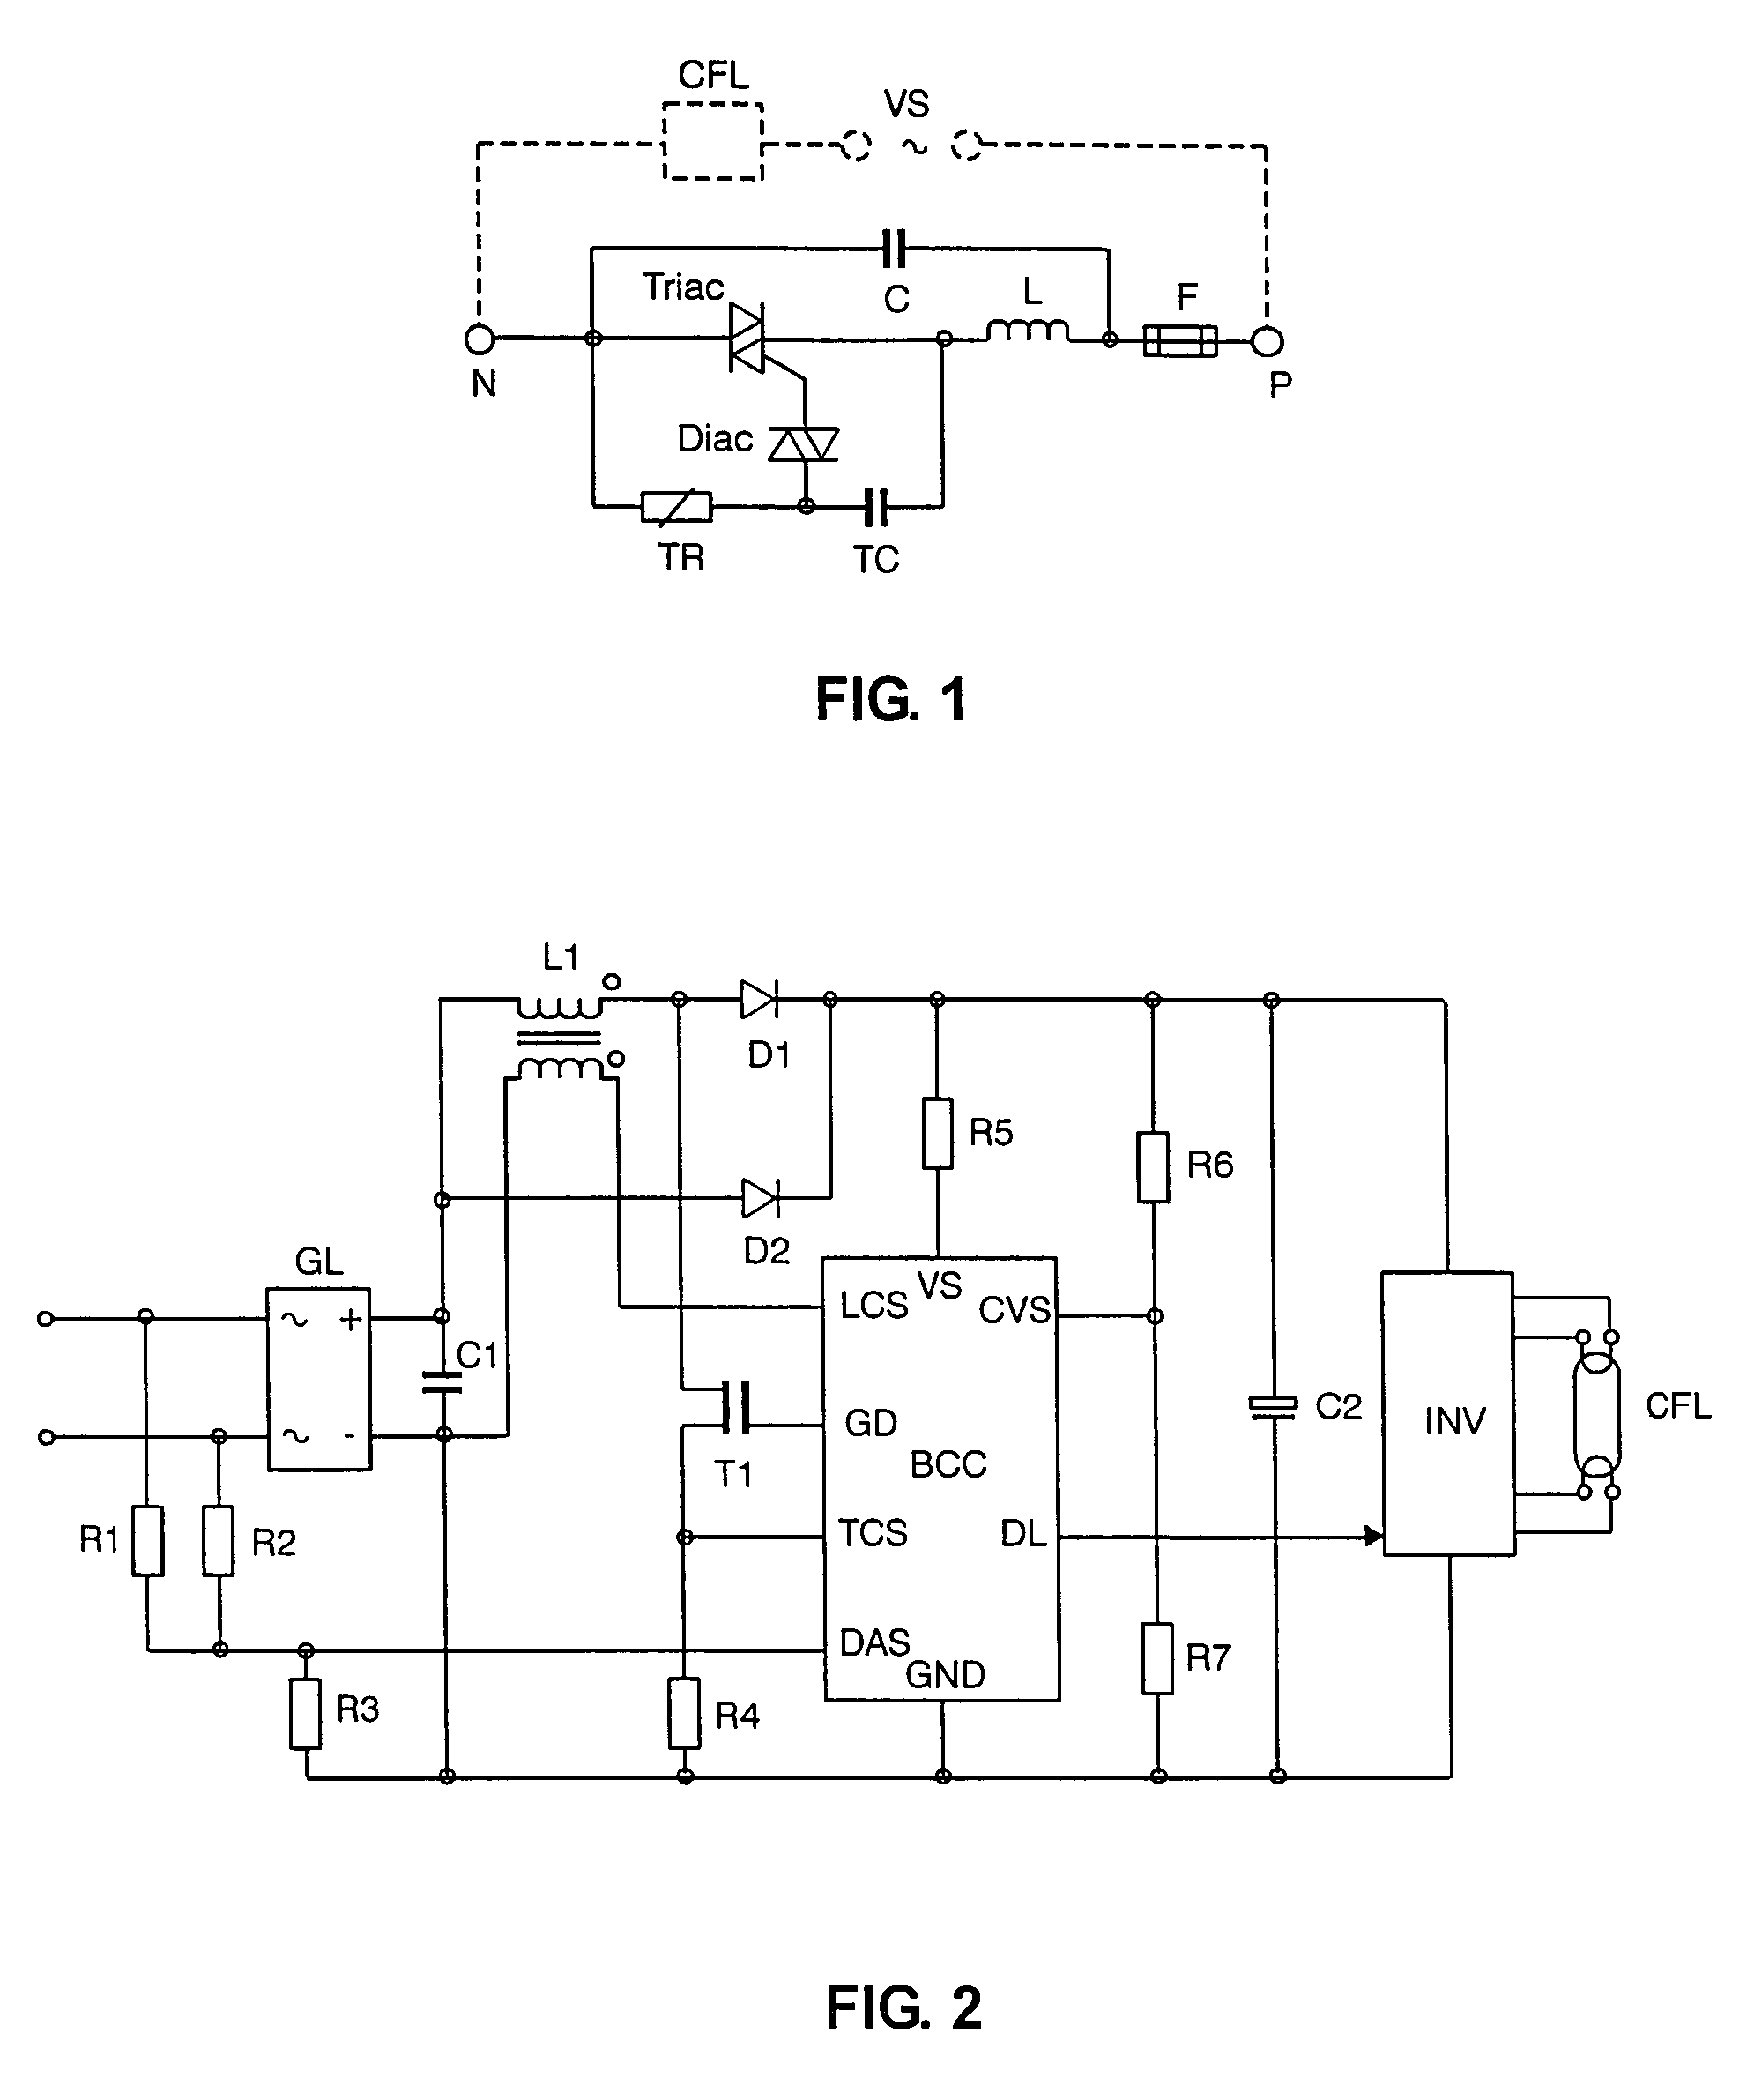 Method for varying the power consumption of capacitive loads